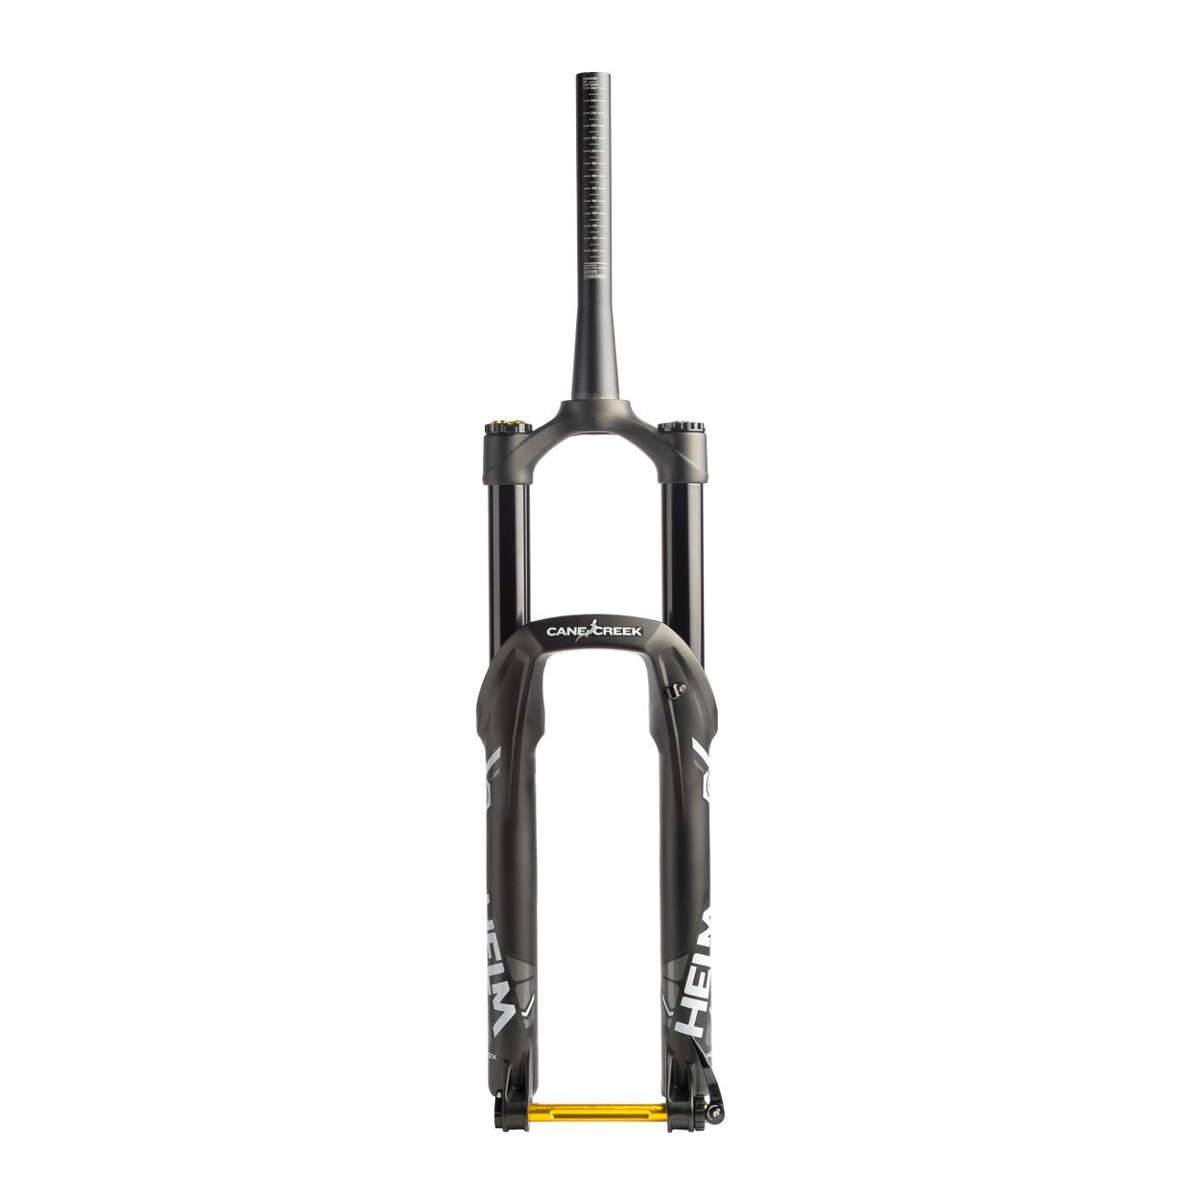 Cane Creek Suspension Fork Helm Coil Black, 27.5 Inch, Tapered, 15x110 mm (Boost)